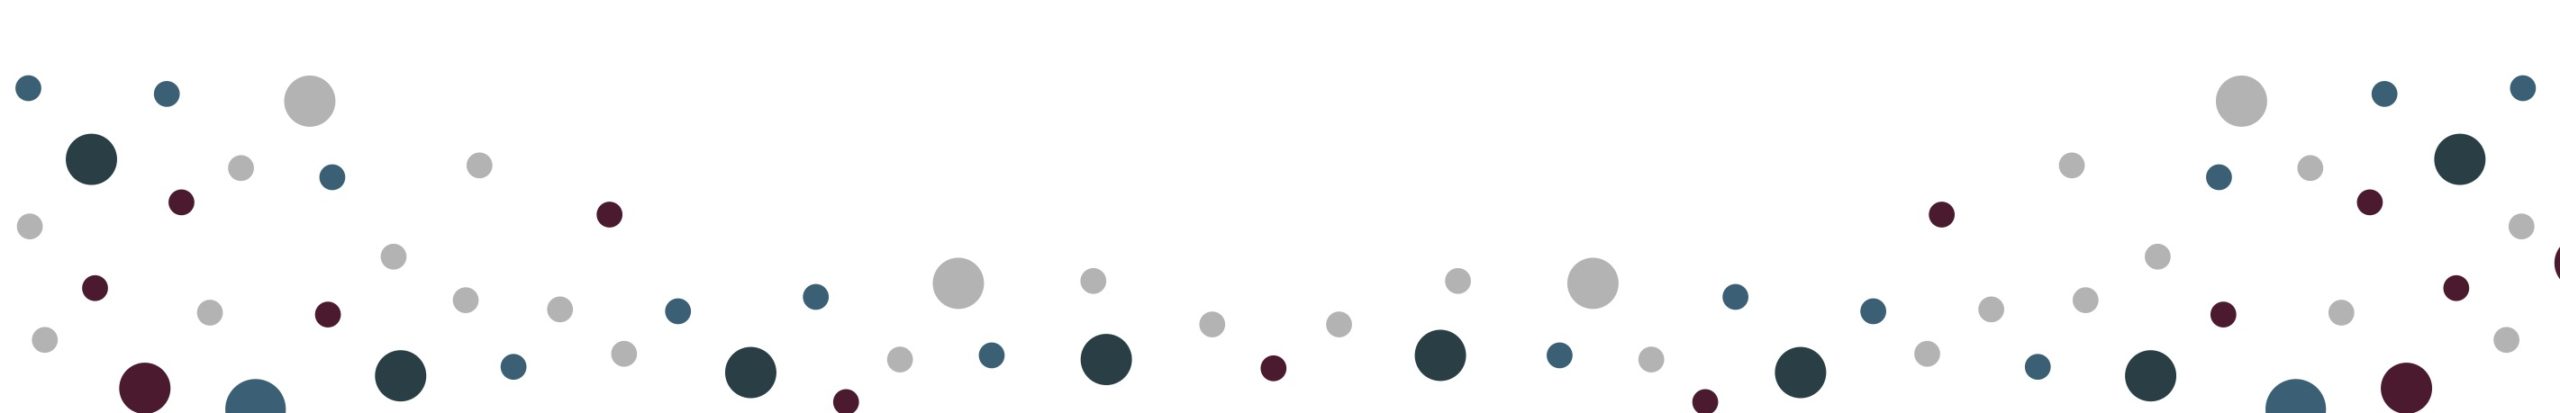 Blue, gray, and purple dots